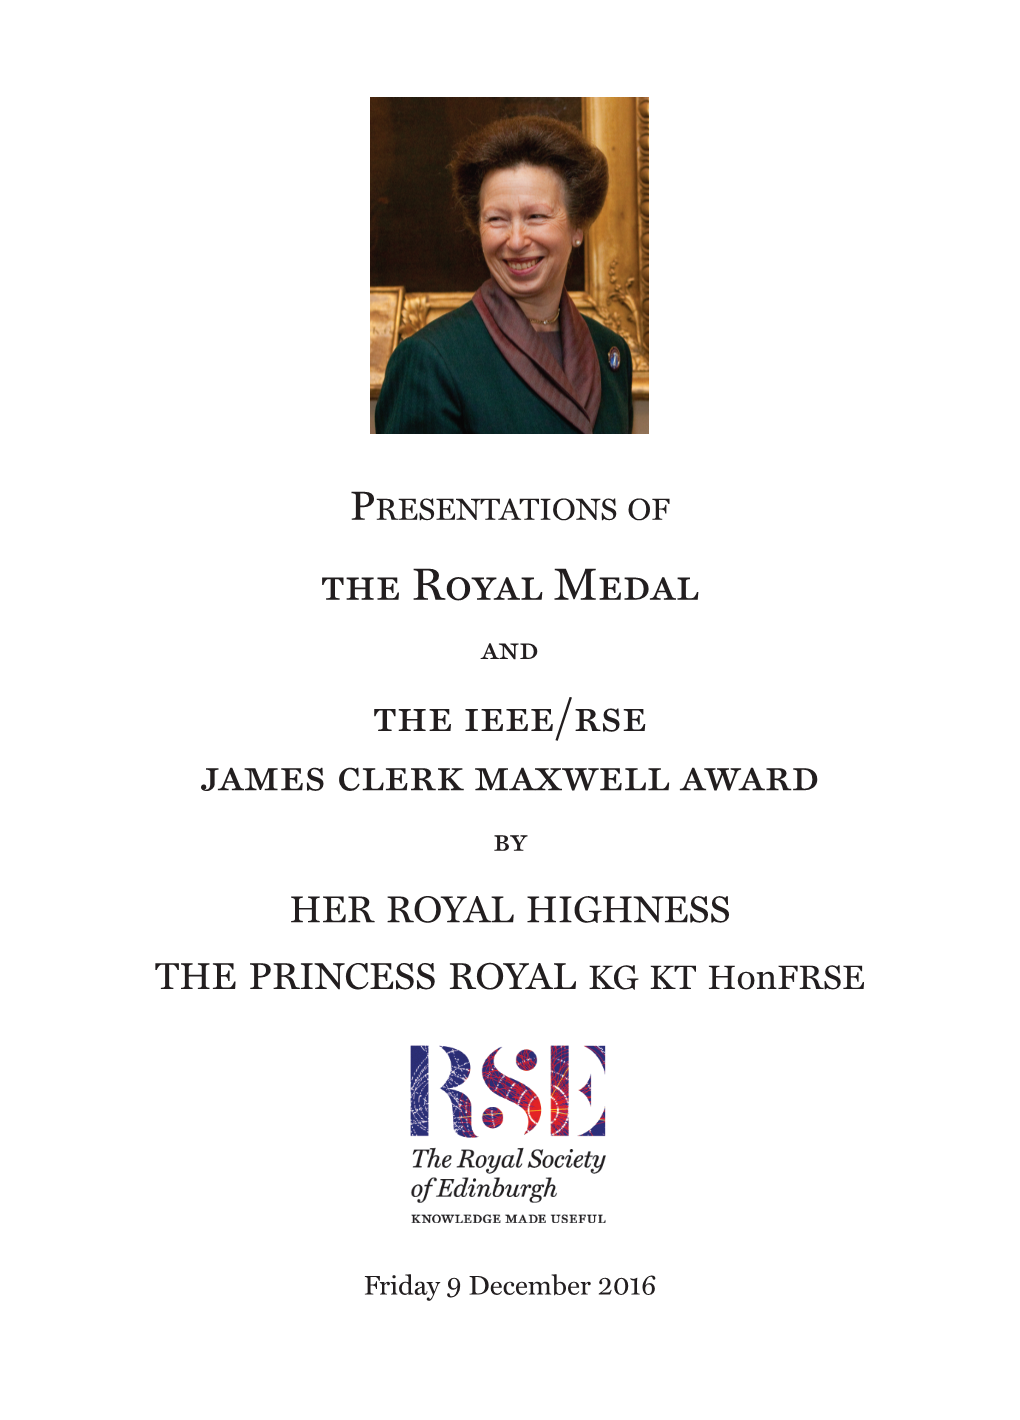 The Royal Medal the Ieee/Rse James Clerk Maxwell Award